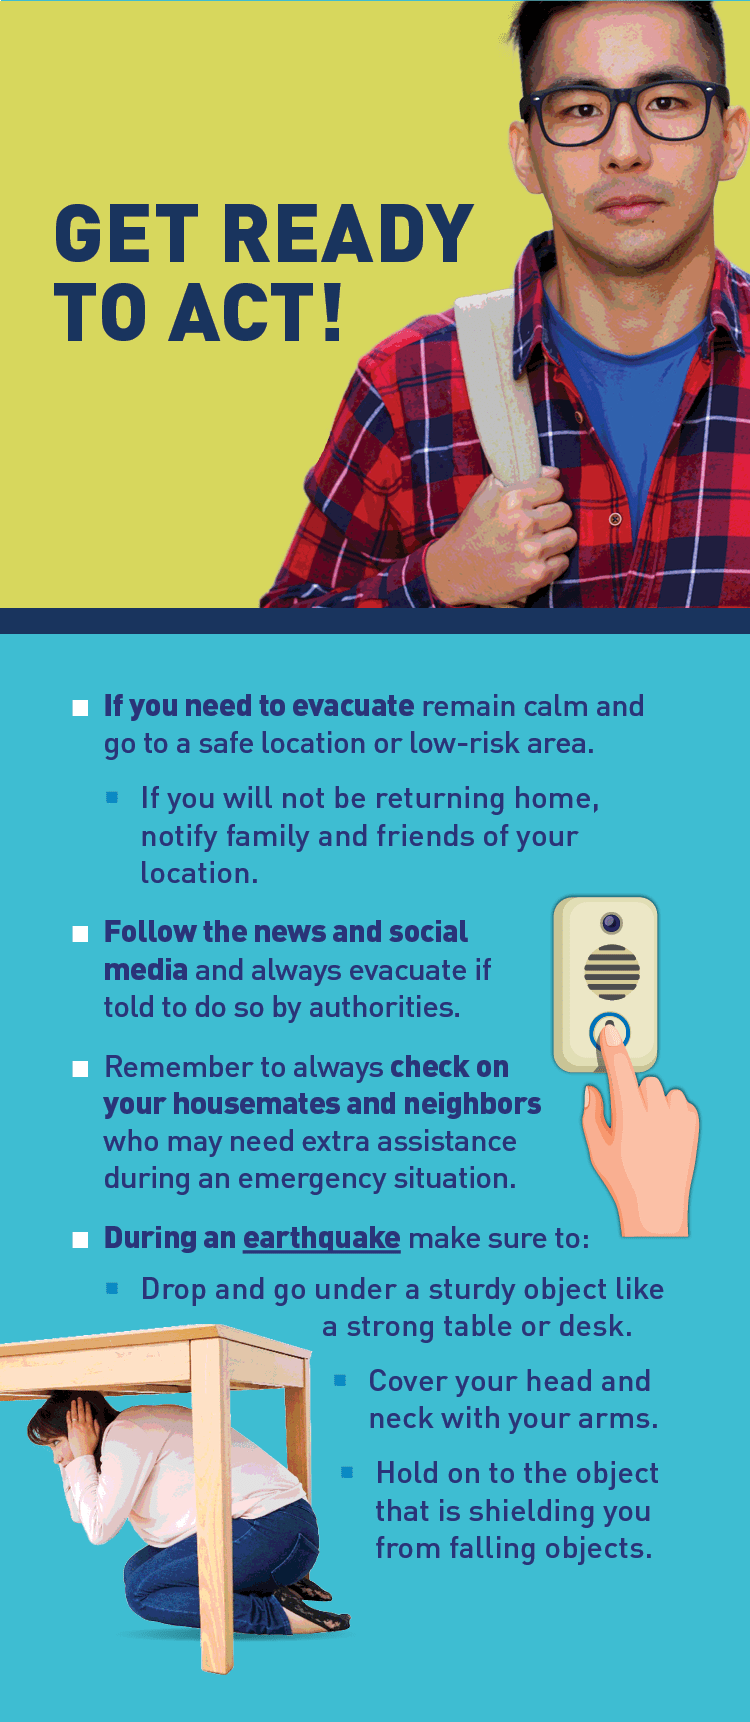 Graphic of doorbell and person sheltering beneath a table. Text: GET READY TO ACT! If you need to evacuate remain calm and go to a safe location or low-risk area. If you will not be returning home, notify family and friends of your location. Follow the news and social media and always evacuate if told to do so by authorities. Remember to always check on your housemates and neighbors who may need extra assistance during an emergency situation. During an earthquake make sure to: Drop and go under a sturdy object like a strong table or desk. Cover your head and neck with your arms. Hold on to the object that is shielding you from falling objects.